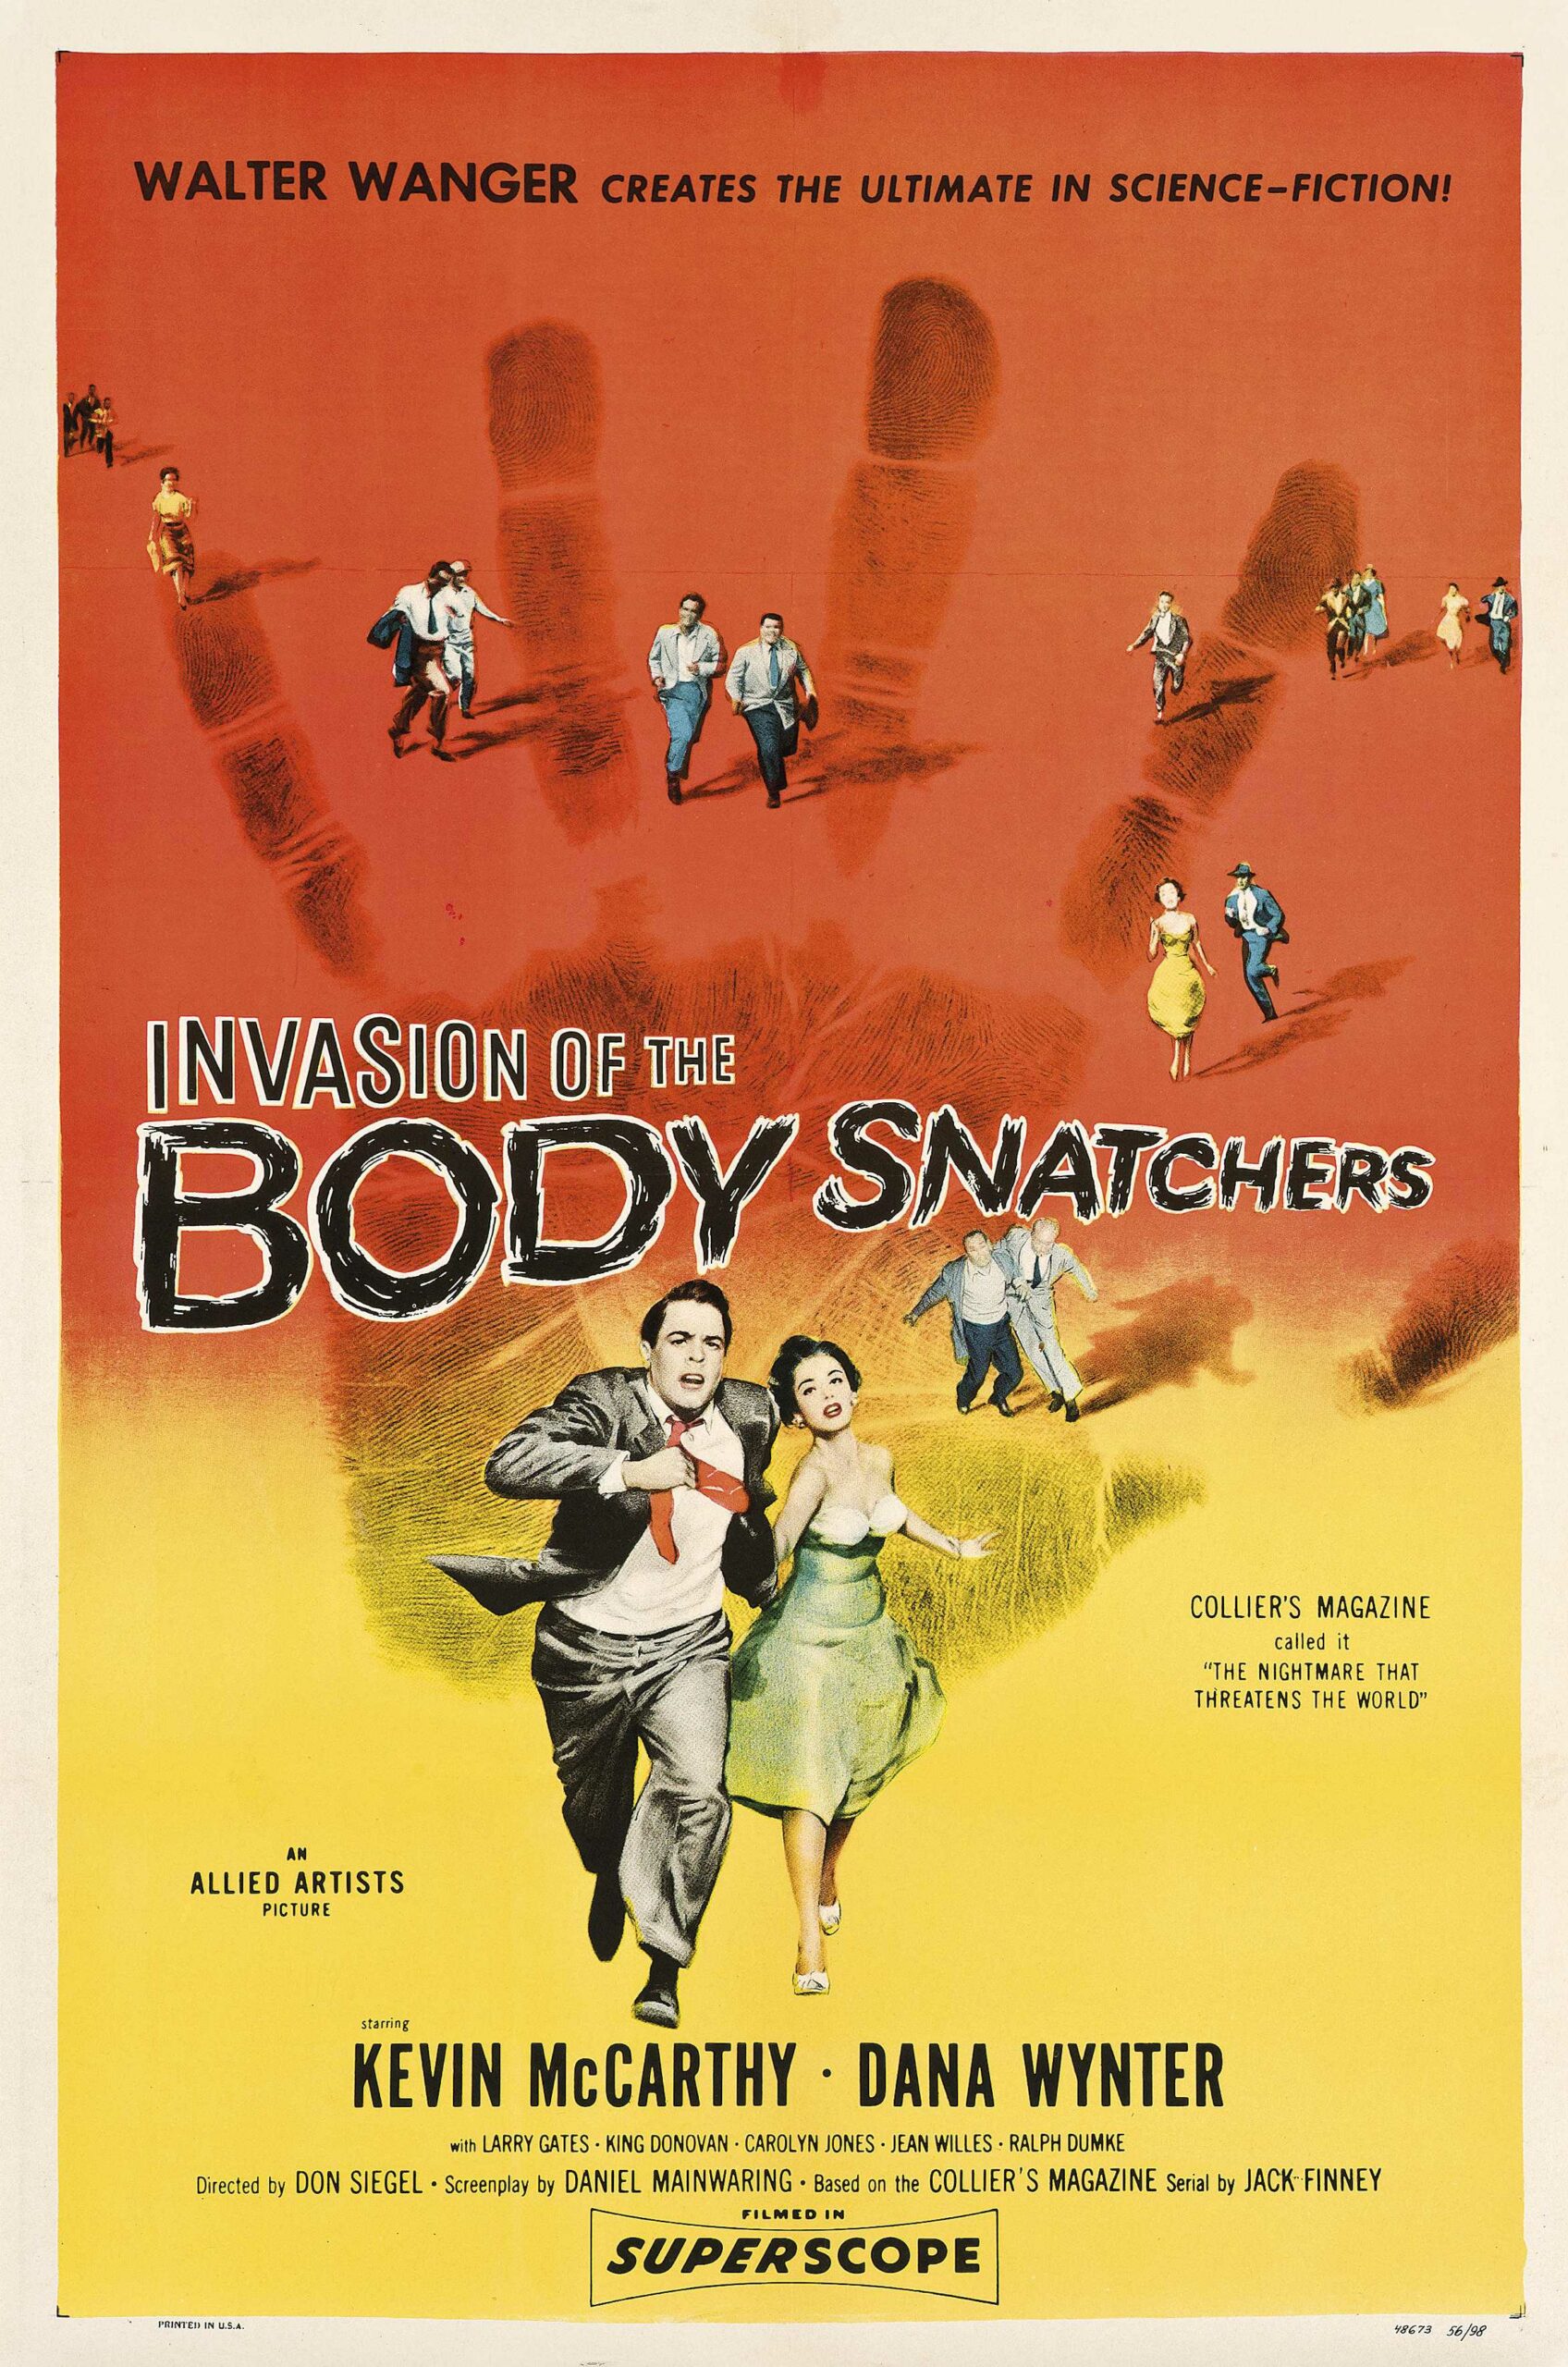 The poster for the 1956 film Invasion of the Body Snatchers features actors Kevin McCarthy in a black suit and red tie and Dana Wynter in a green and white strapless dress running toward the viewer beneath the title INVASION OF THE BODY SNATCHERS. Behind them, the figures of people with barely discernible features cast shadows across a giant black handprint stamped over a red and yellow background.